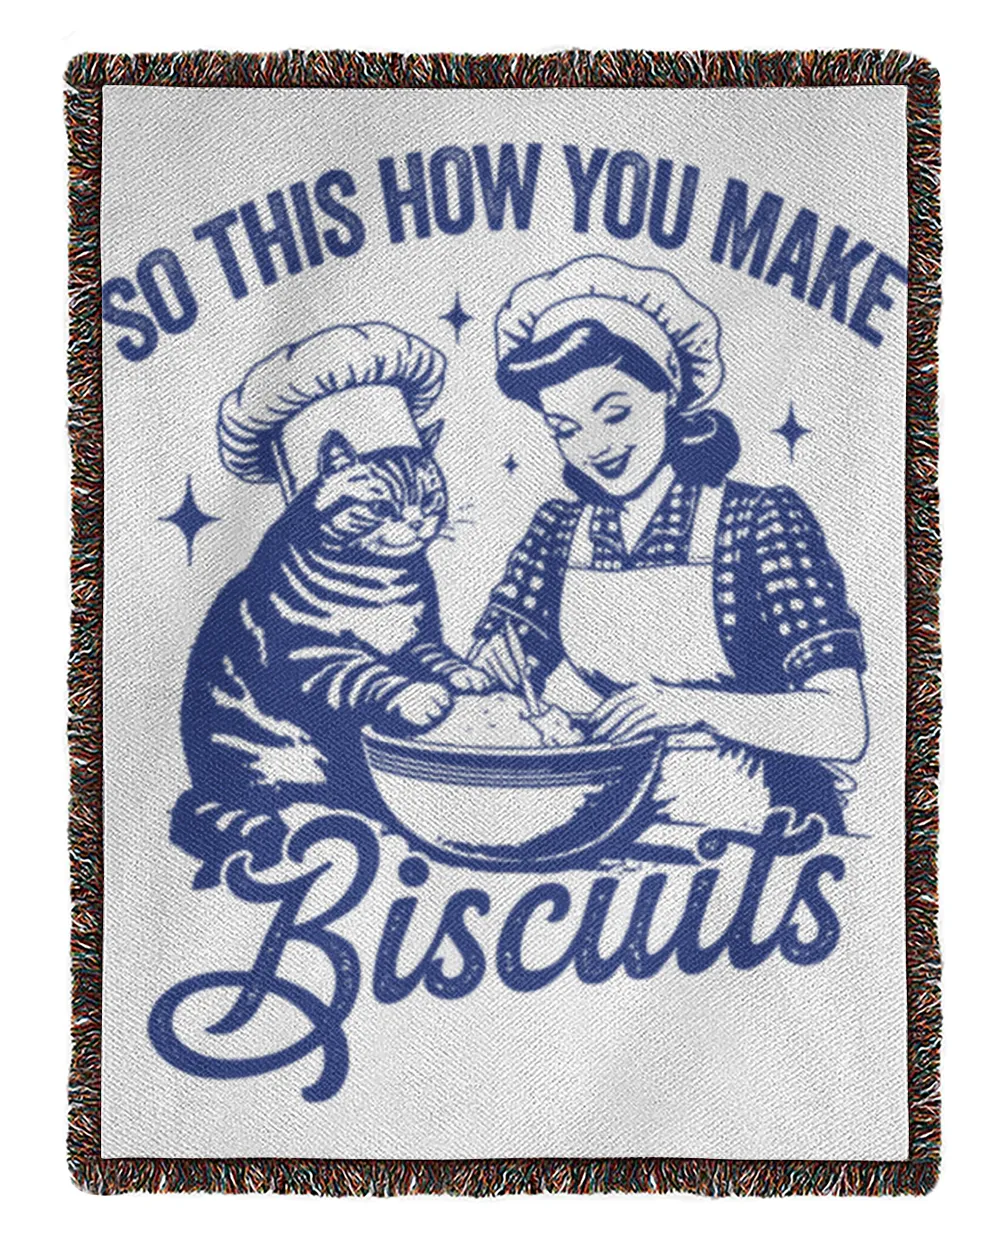 So This Is How You Make Biscuits Graphic T-Shirt, Retro Unisex Adult T Shirt, Vintage Baking T Shirt, Nostalgia